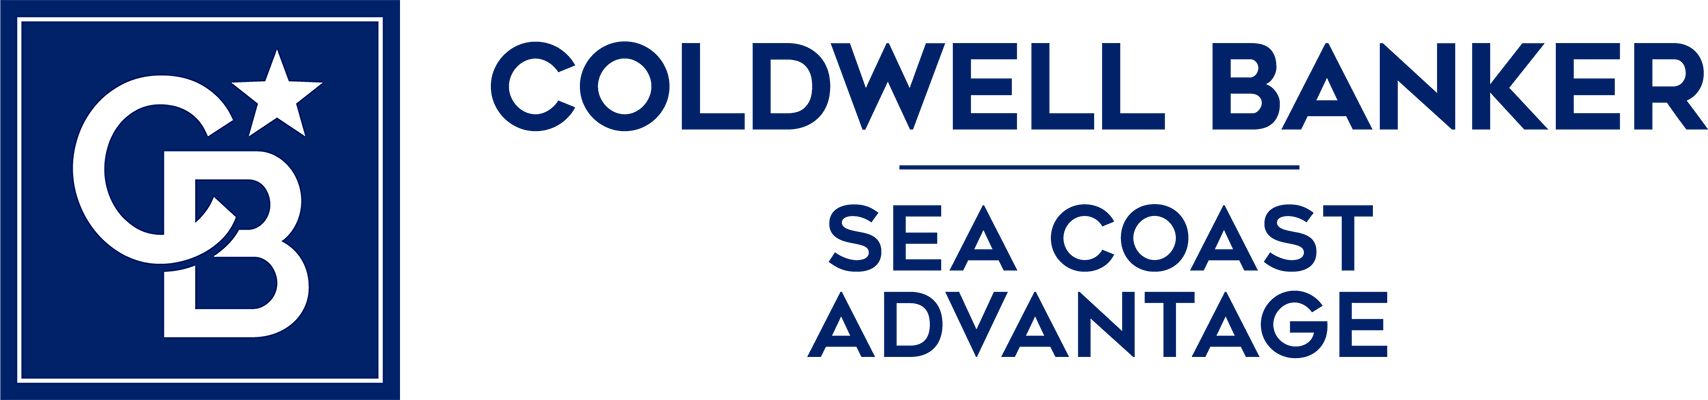 Andrew Fisher - Coldwell Banker Coastal Rivers Logo